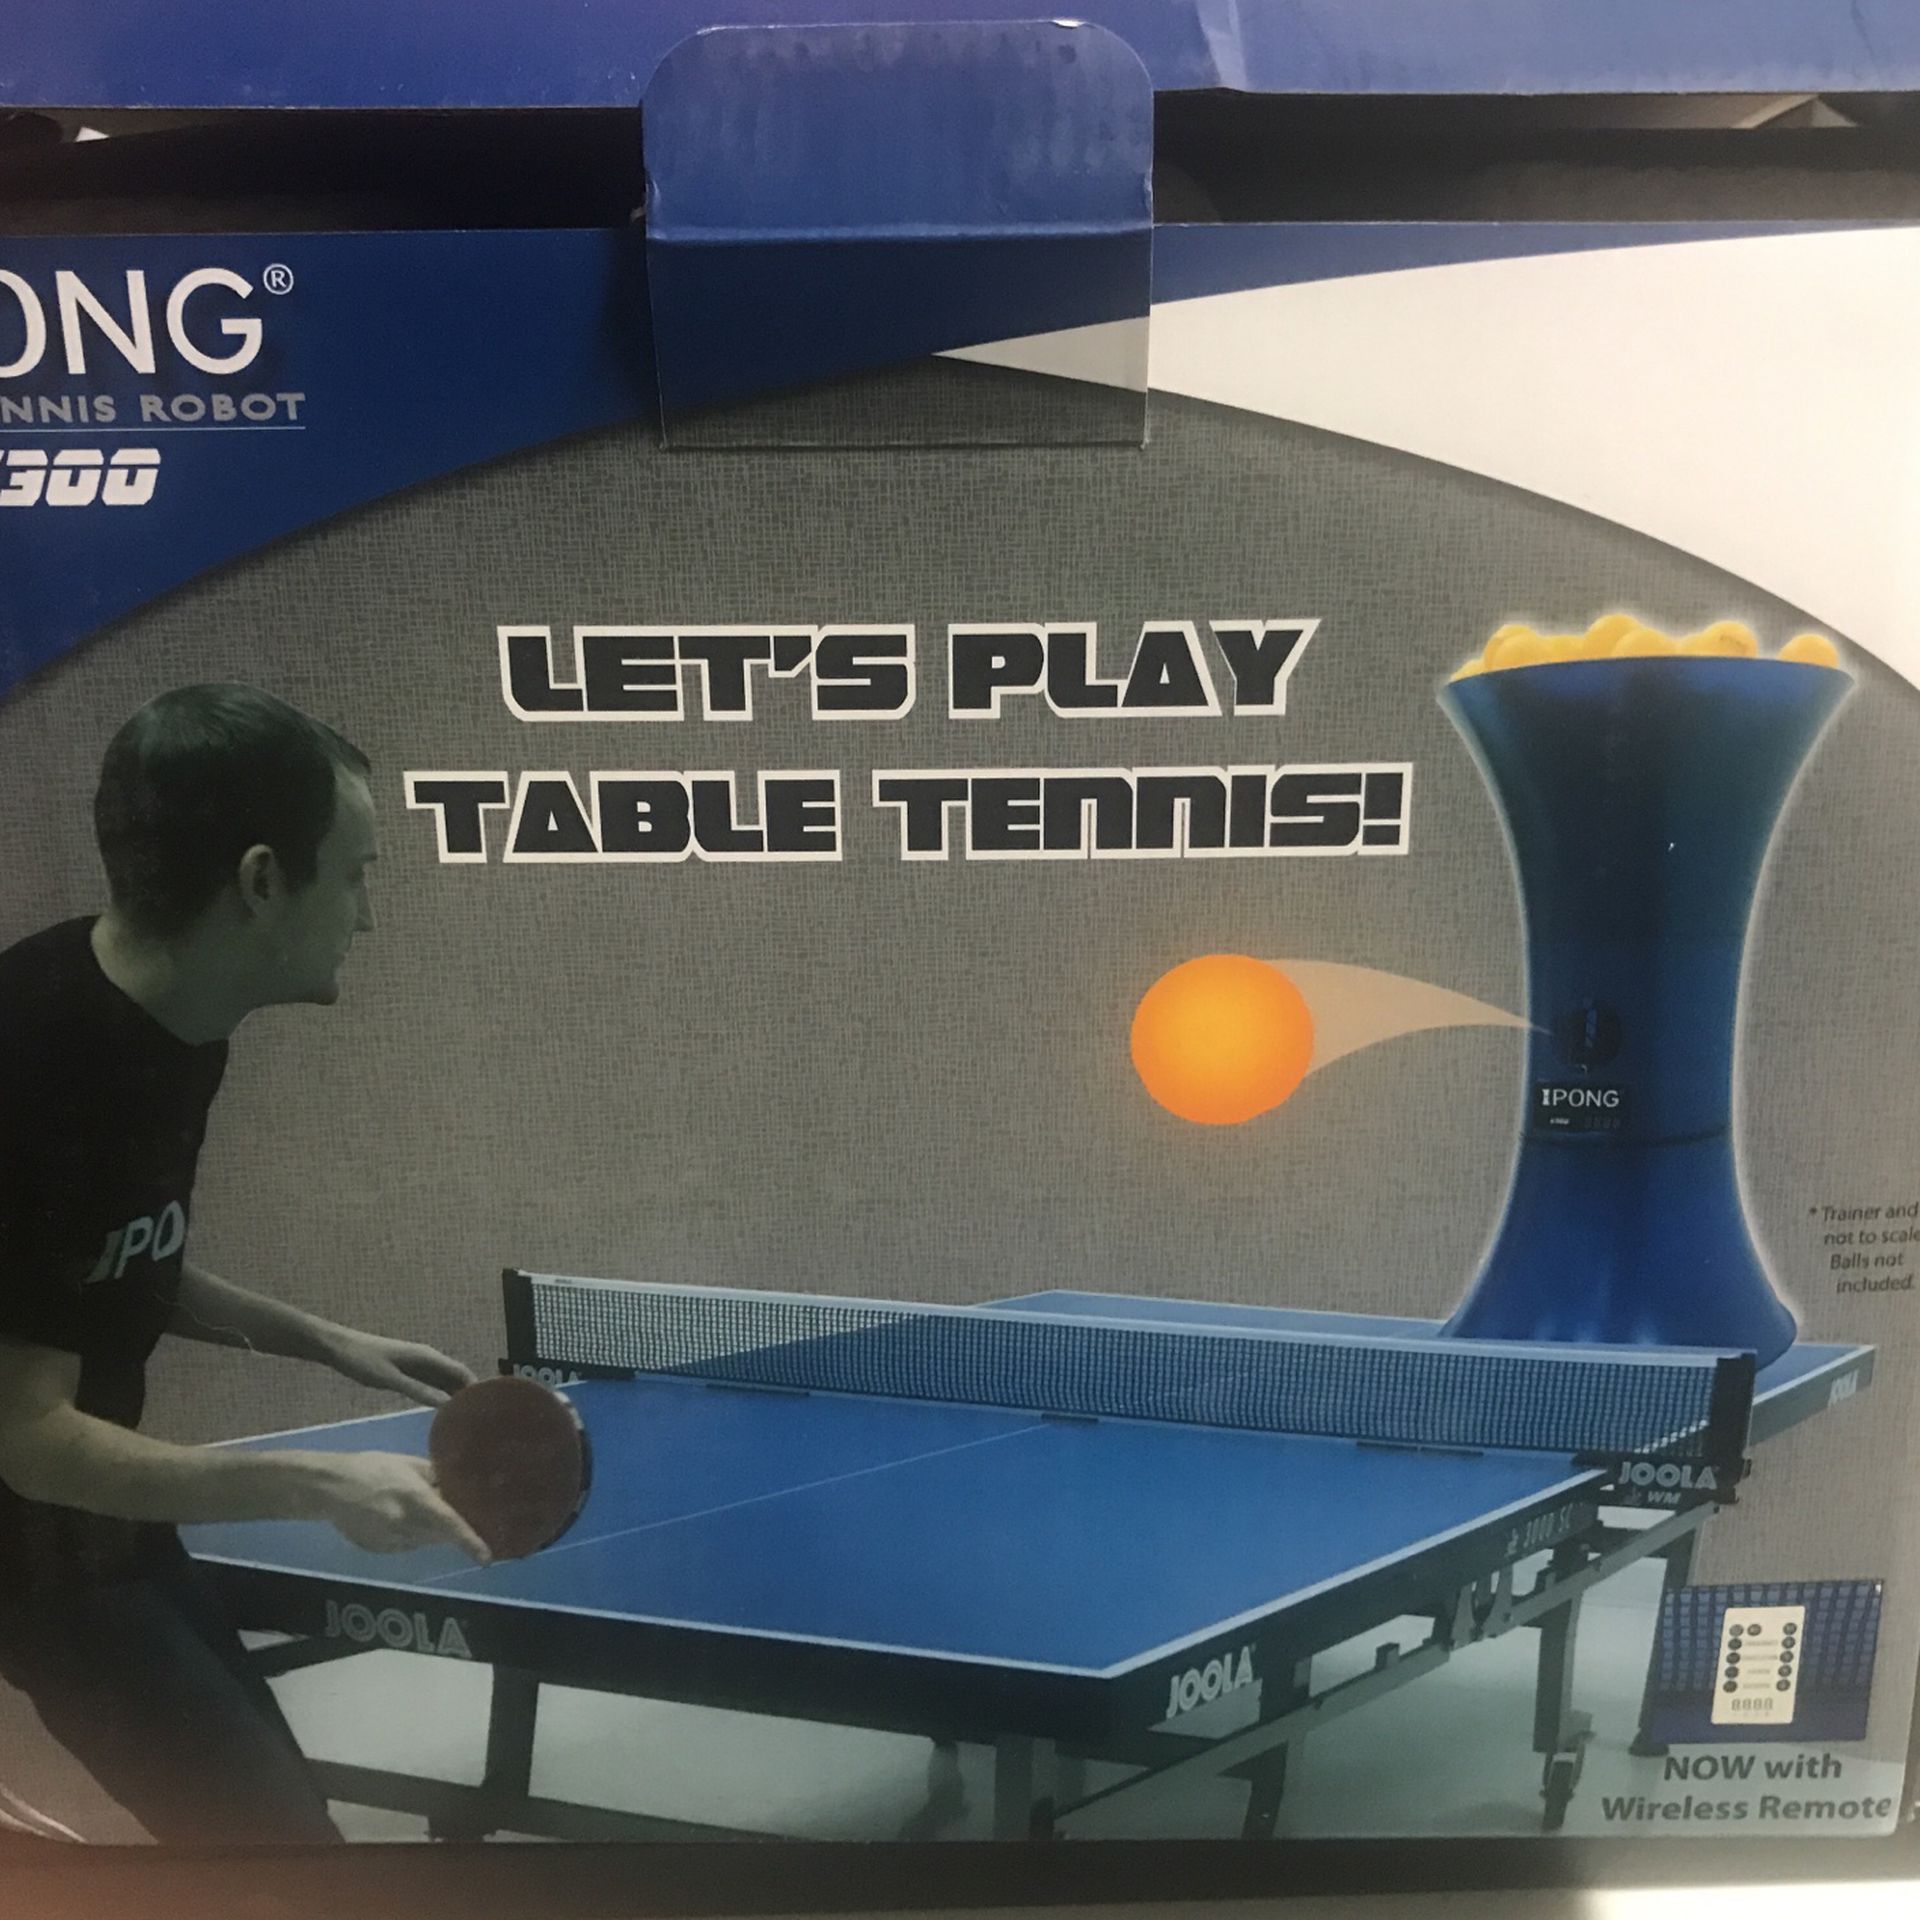 IPong V300 Ping Pong Robot for Sale in Broussard, LA - OfferUp